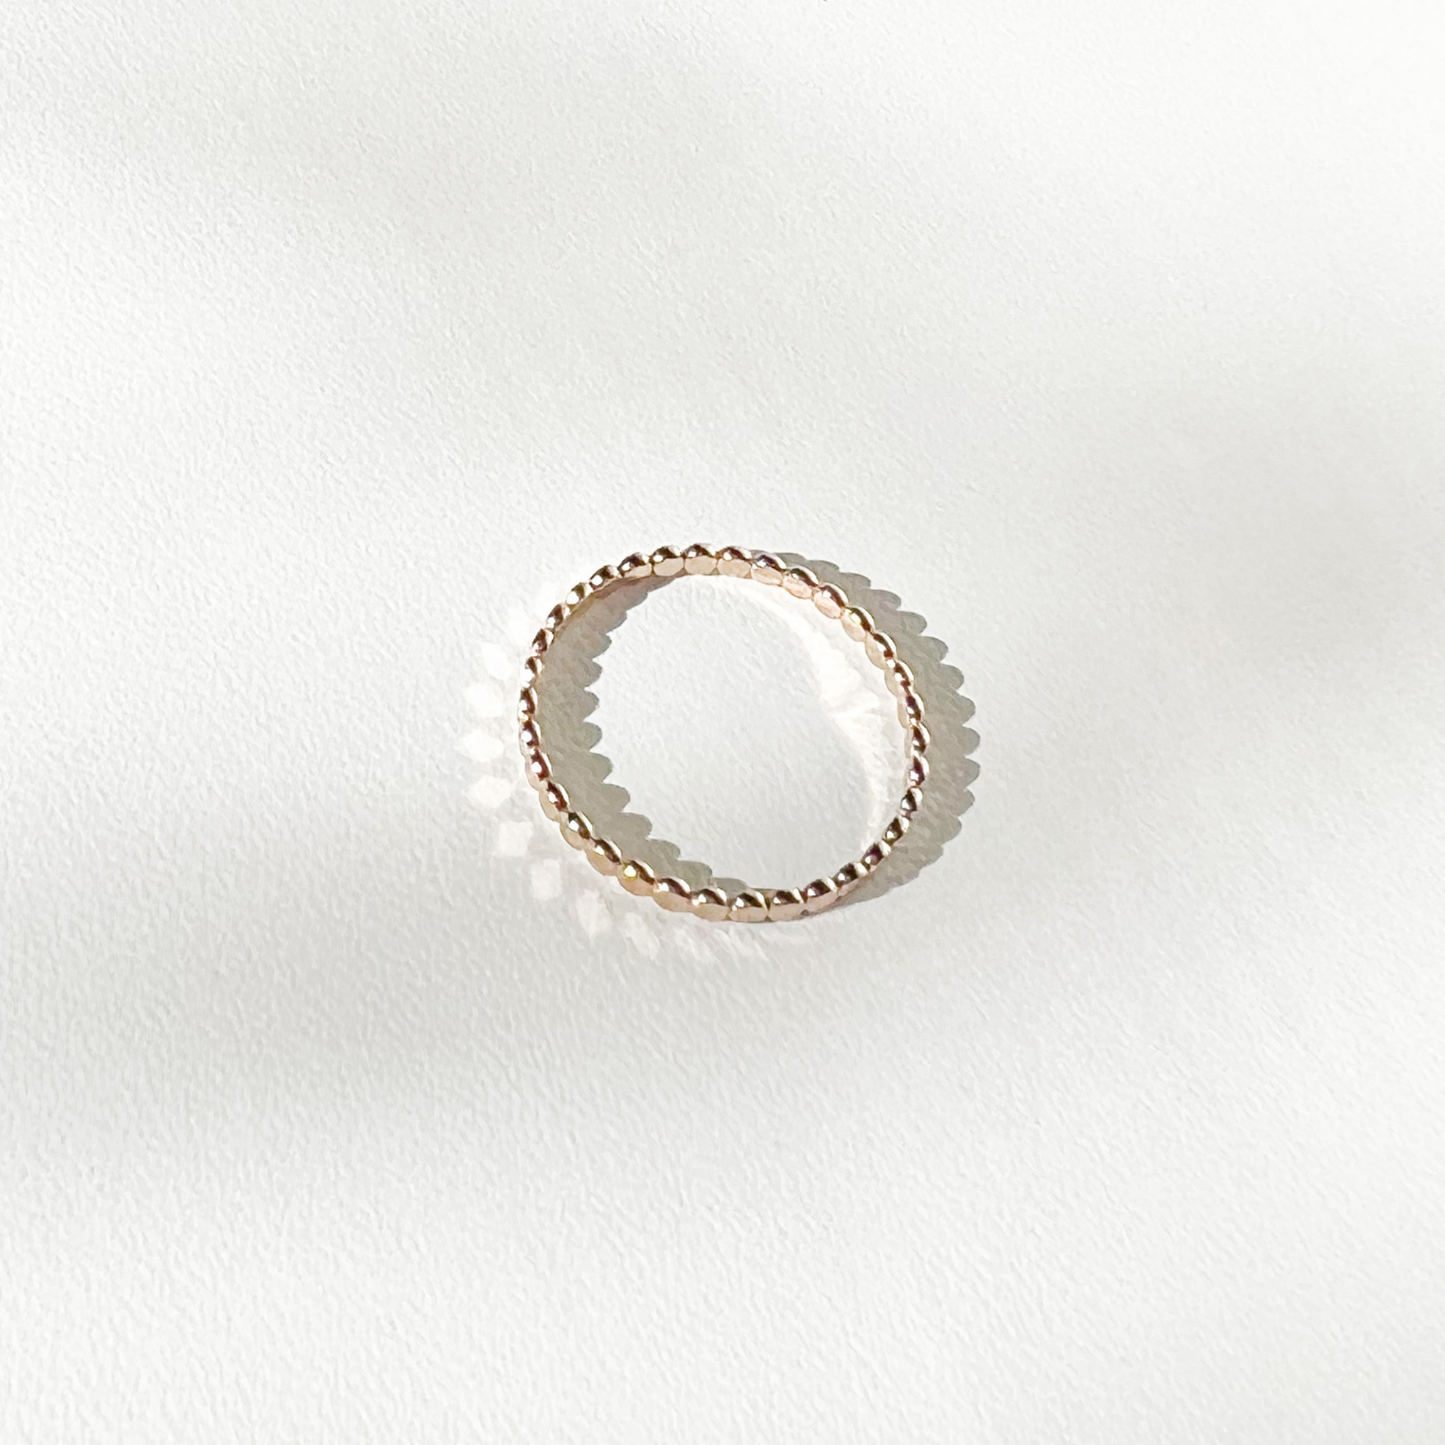 Roop jewelry gold filled ring. Flat gold dotted ring. High quality ring. Tarnish-free gold ring. Spring 2022 fashion trends. Spring 2022 jewelry trends.